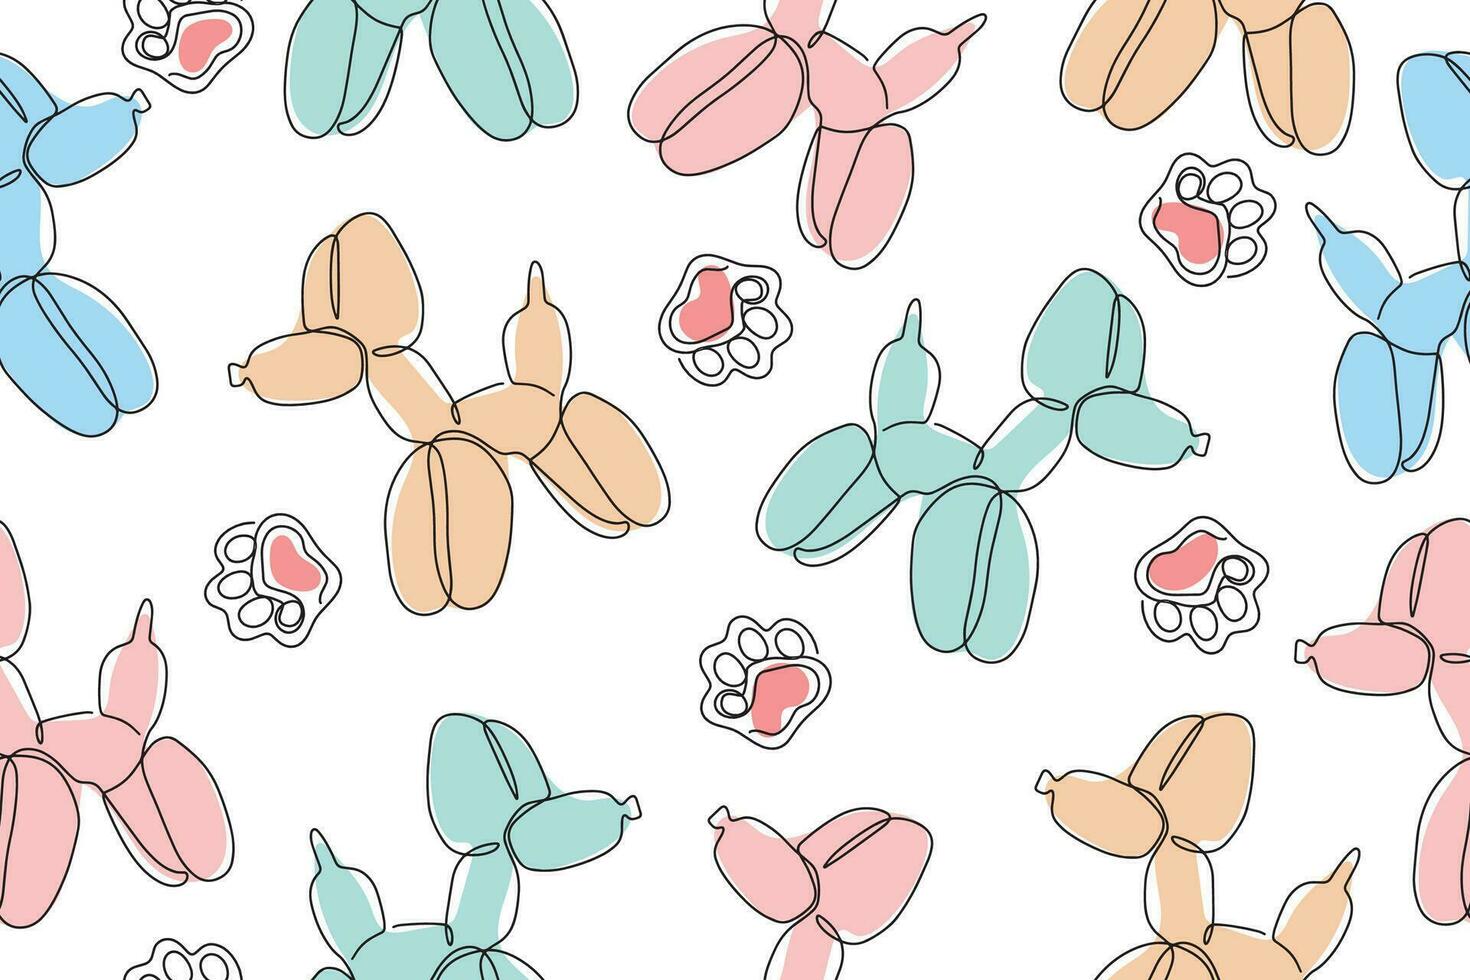 Classic balloon dog. Vector seamless pattern of cute cartoon bubble animal in color. Design element for logo, card, t-shirt print, invitation, accessories. Vector